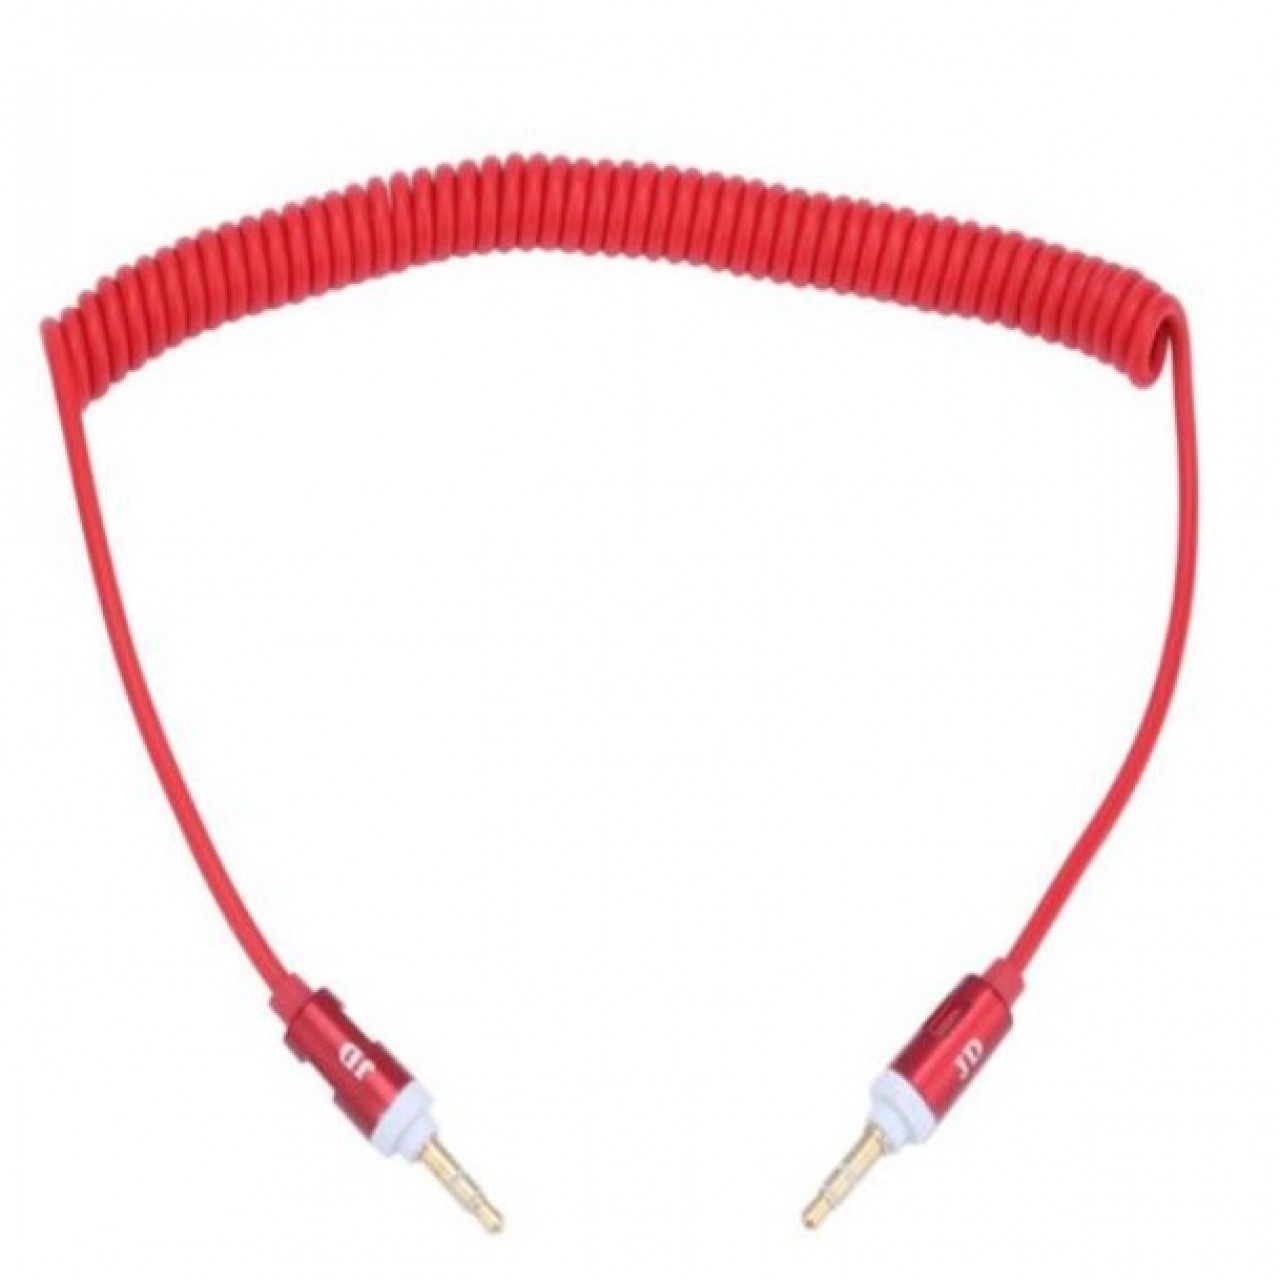 Aux Cables Spring Cable for Car for Samsung for iphone - Red